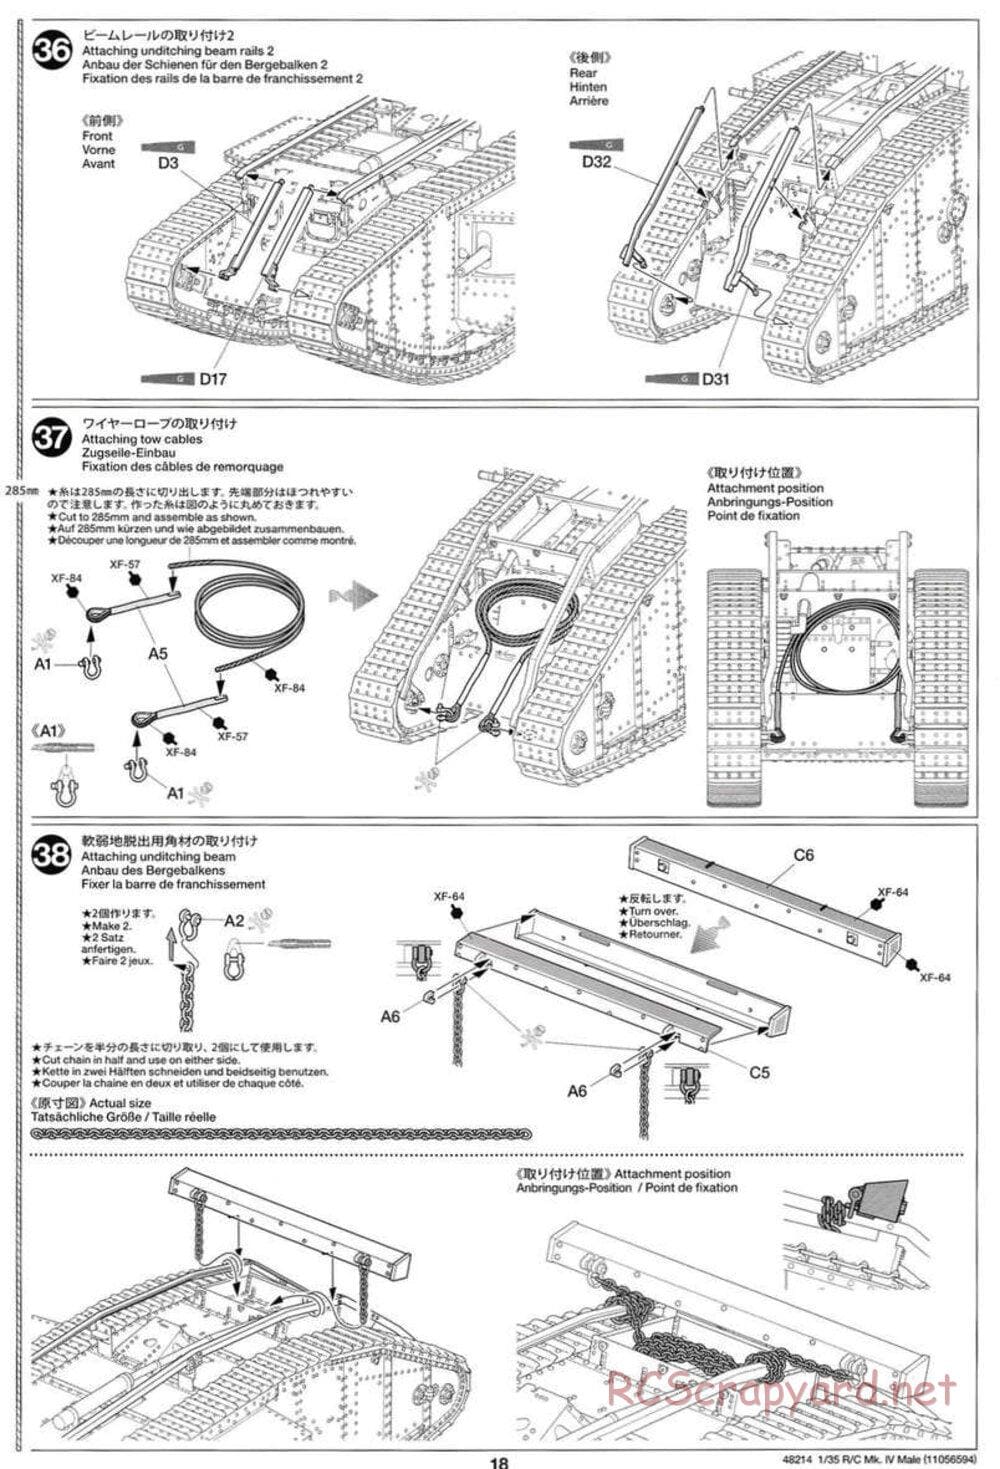 Tamiya - WWI British Tank Mark IV Male - 1/35 Scale Chassis - Manual - Page 18